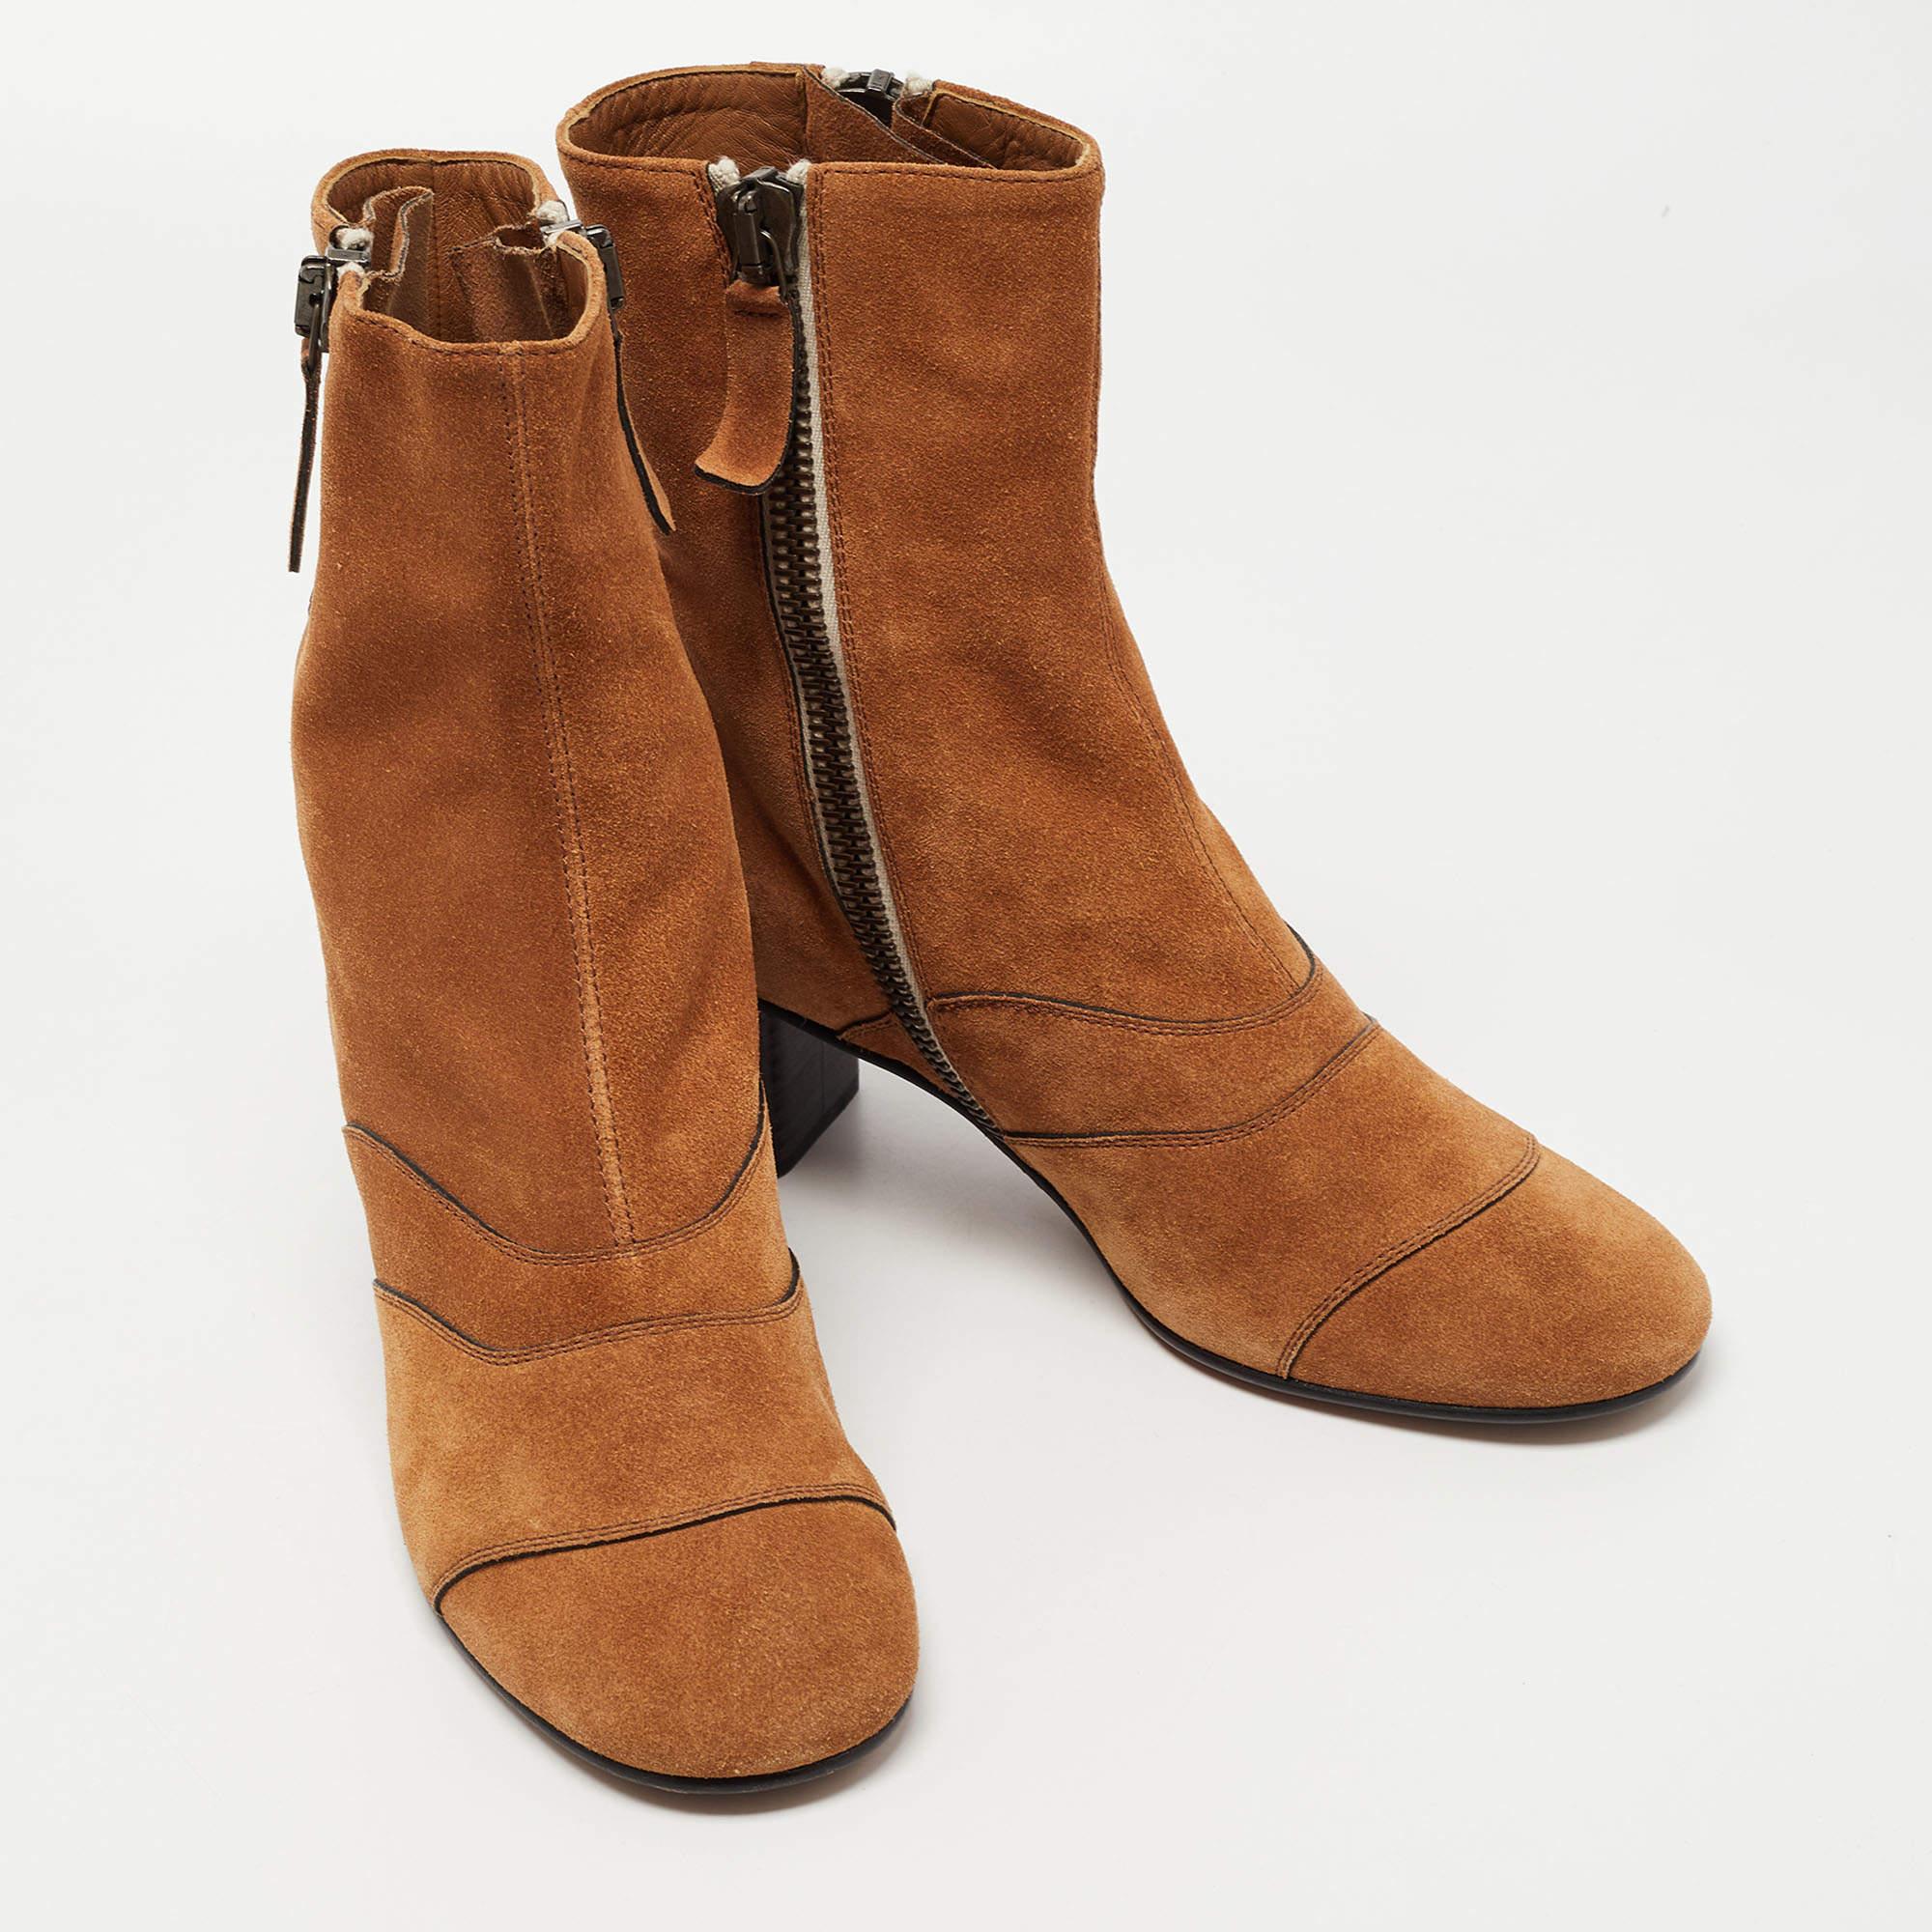 Chloe Brown Suede Zip Ankle Boots Size 37.5 1